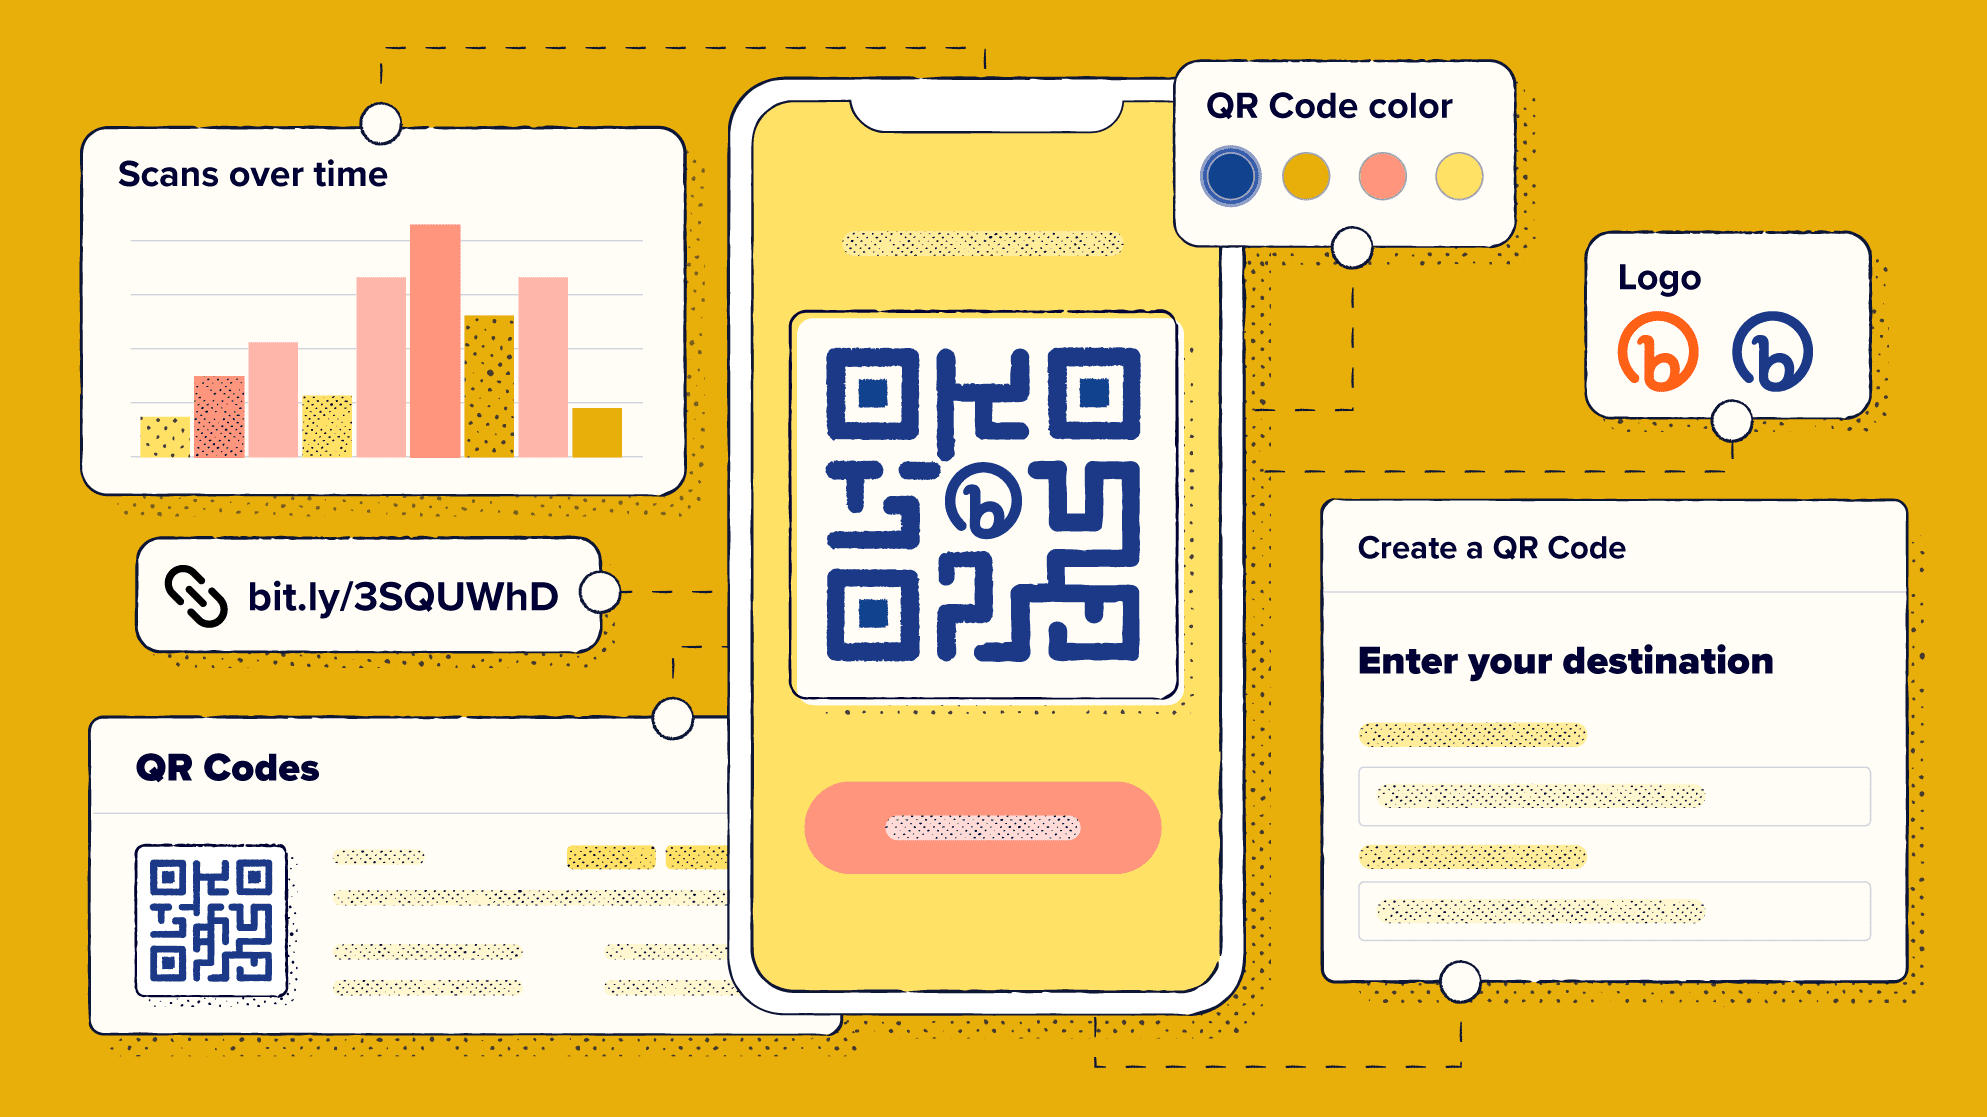 How To Make A Qr Code - Generate A Qr Code Using Bitly